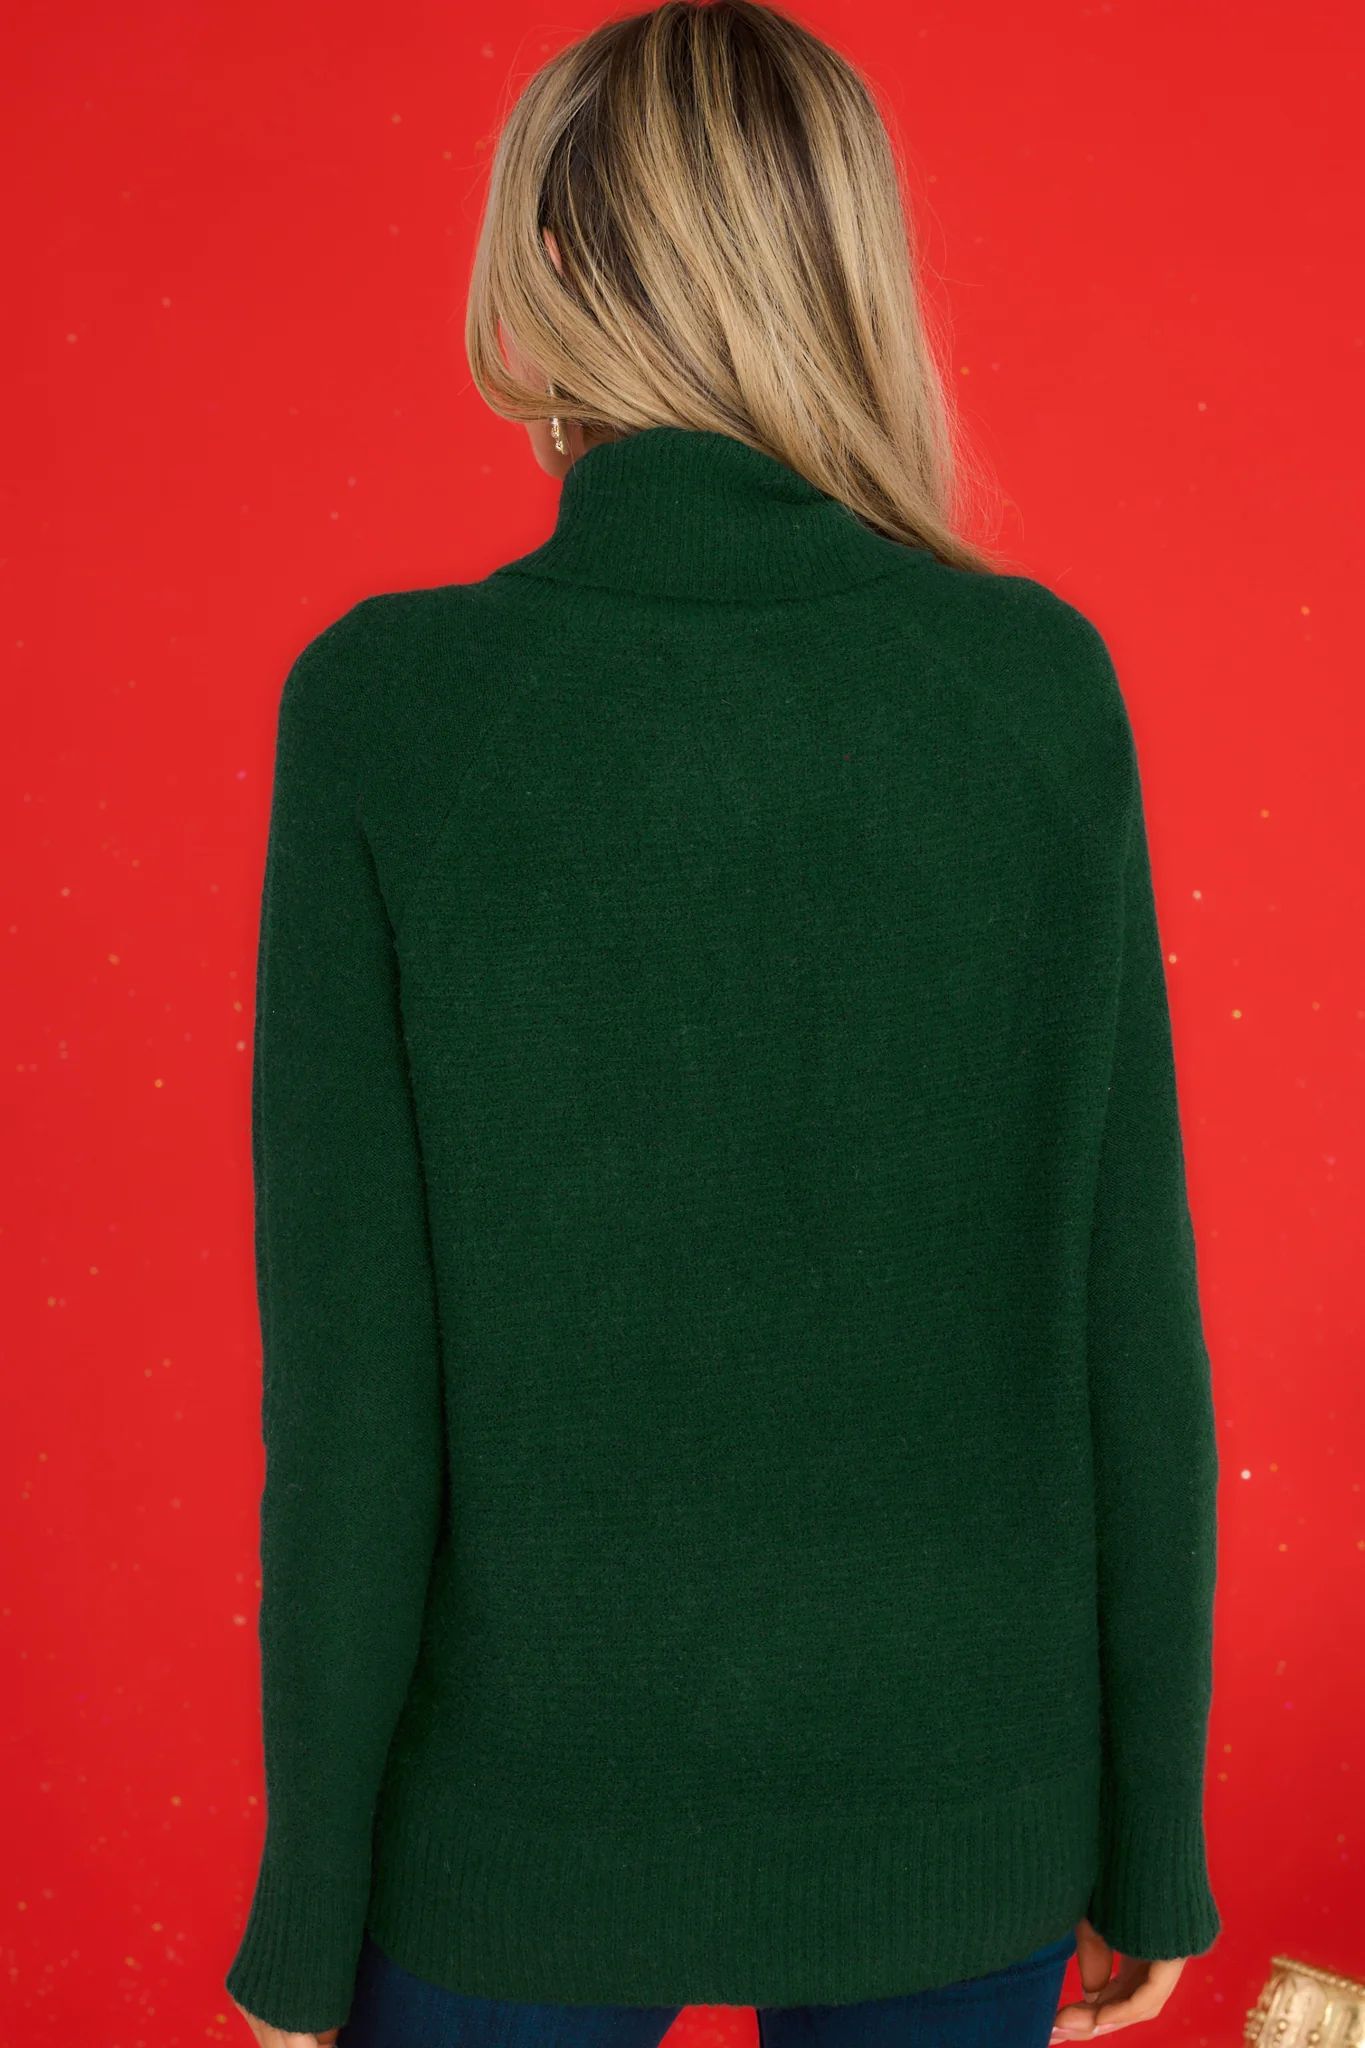 So Unbothered Hunter Green Sweater | Red Dress 